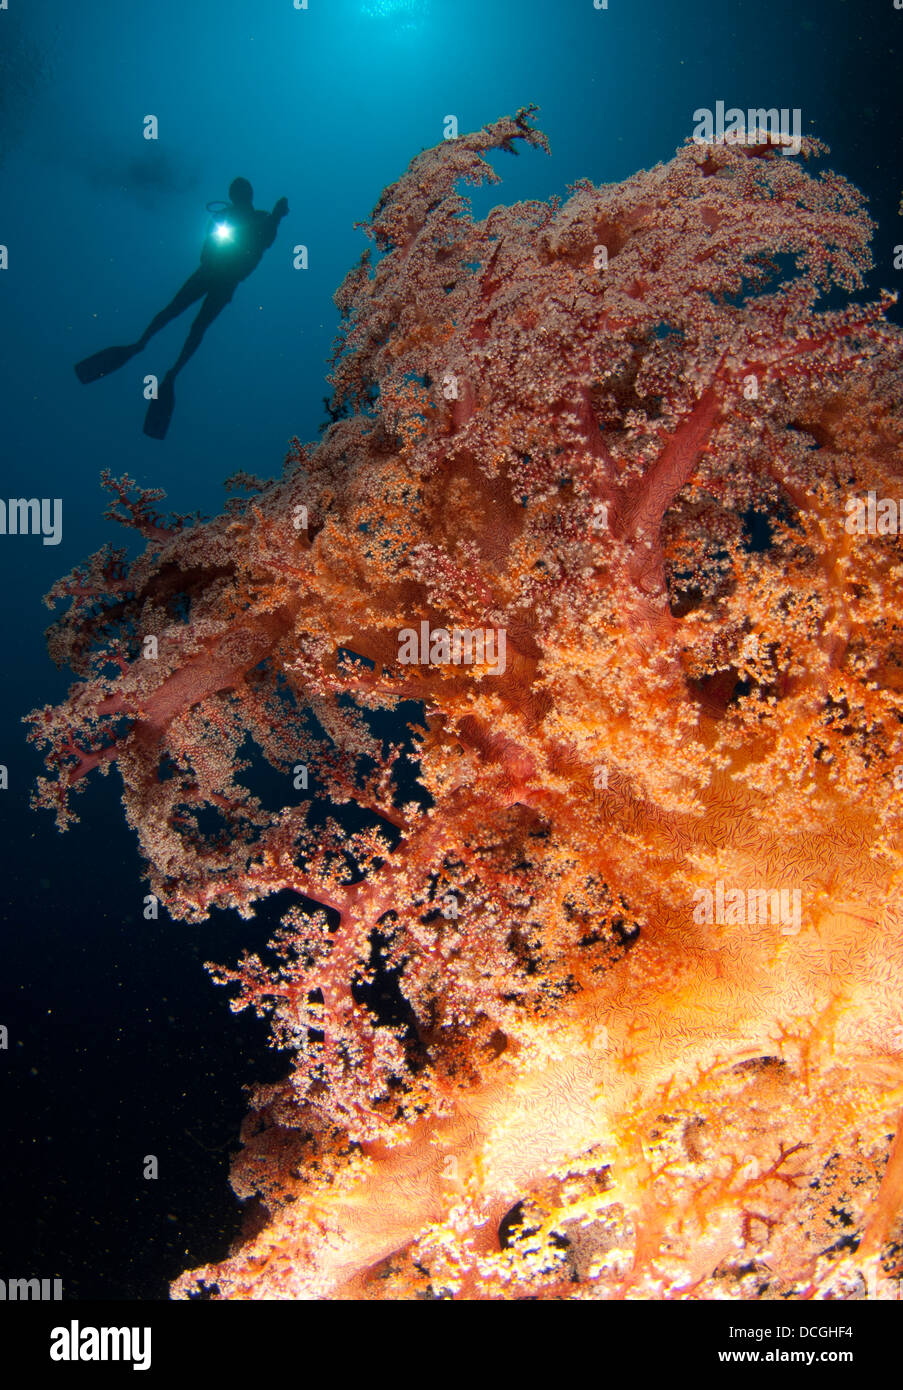 Close-up view of soft tree coral (Dendronephthya sp.) with diver in background, Gorontalo, Sulawesi, Indonesia. Stock Photo